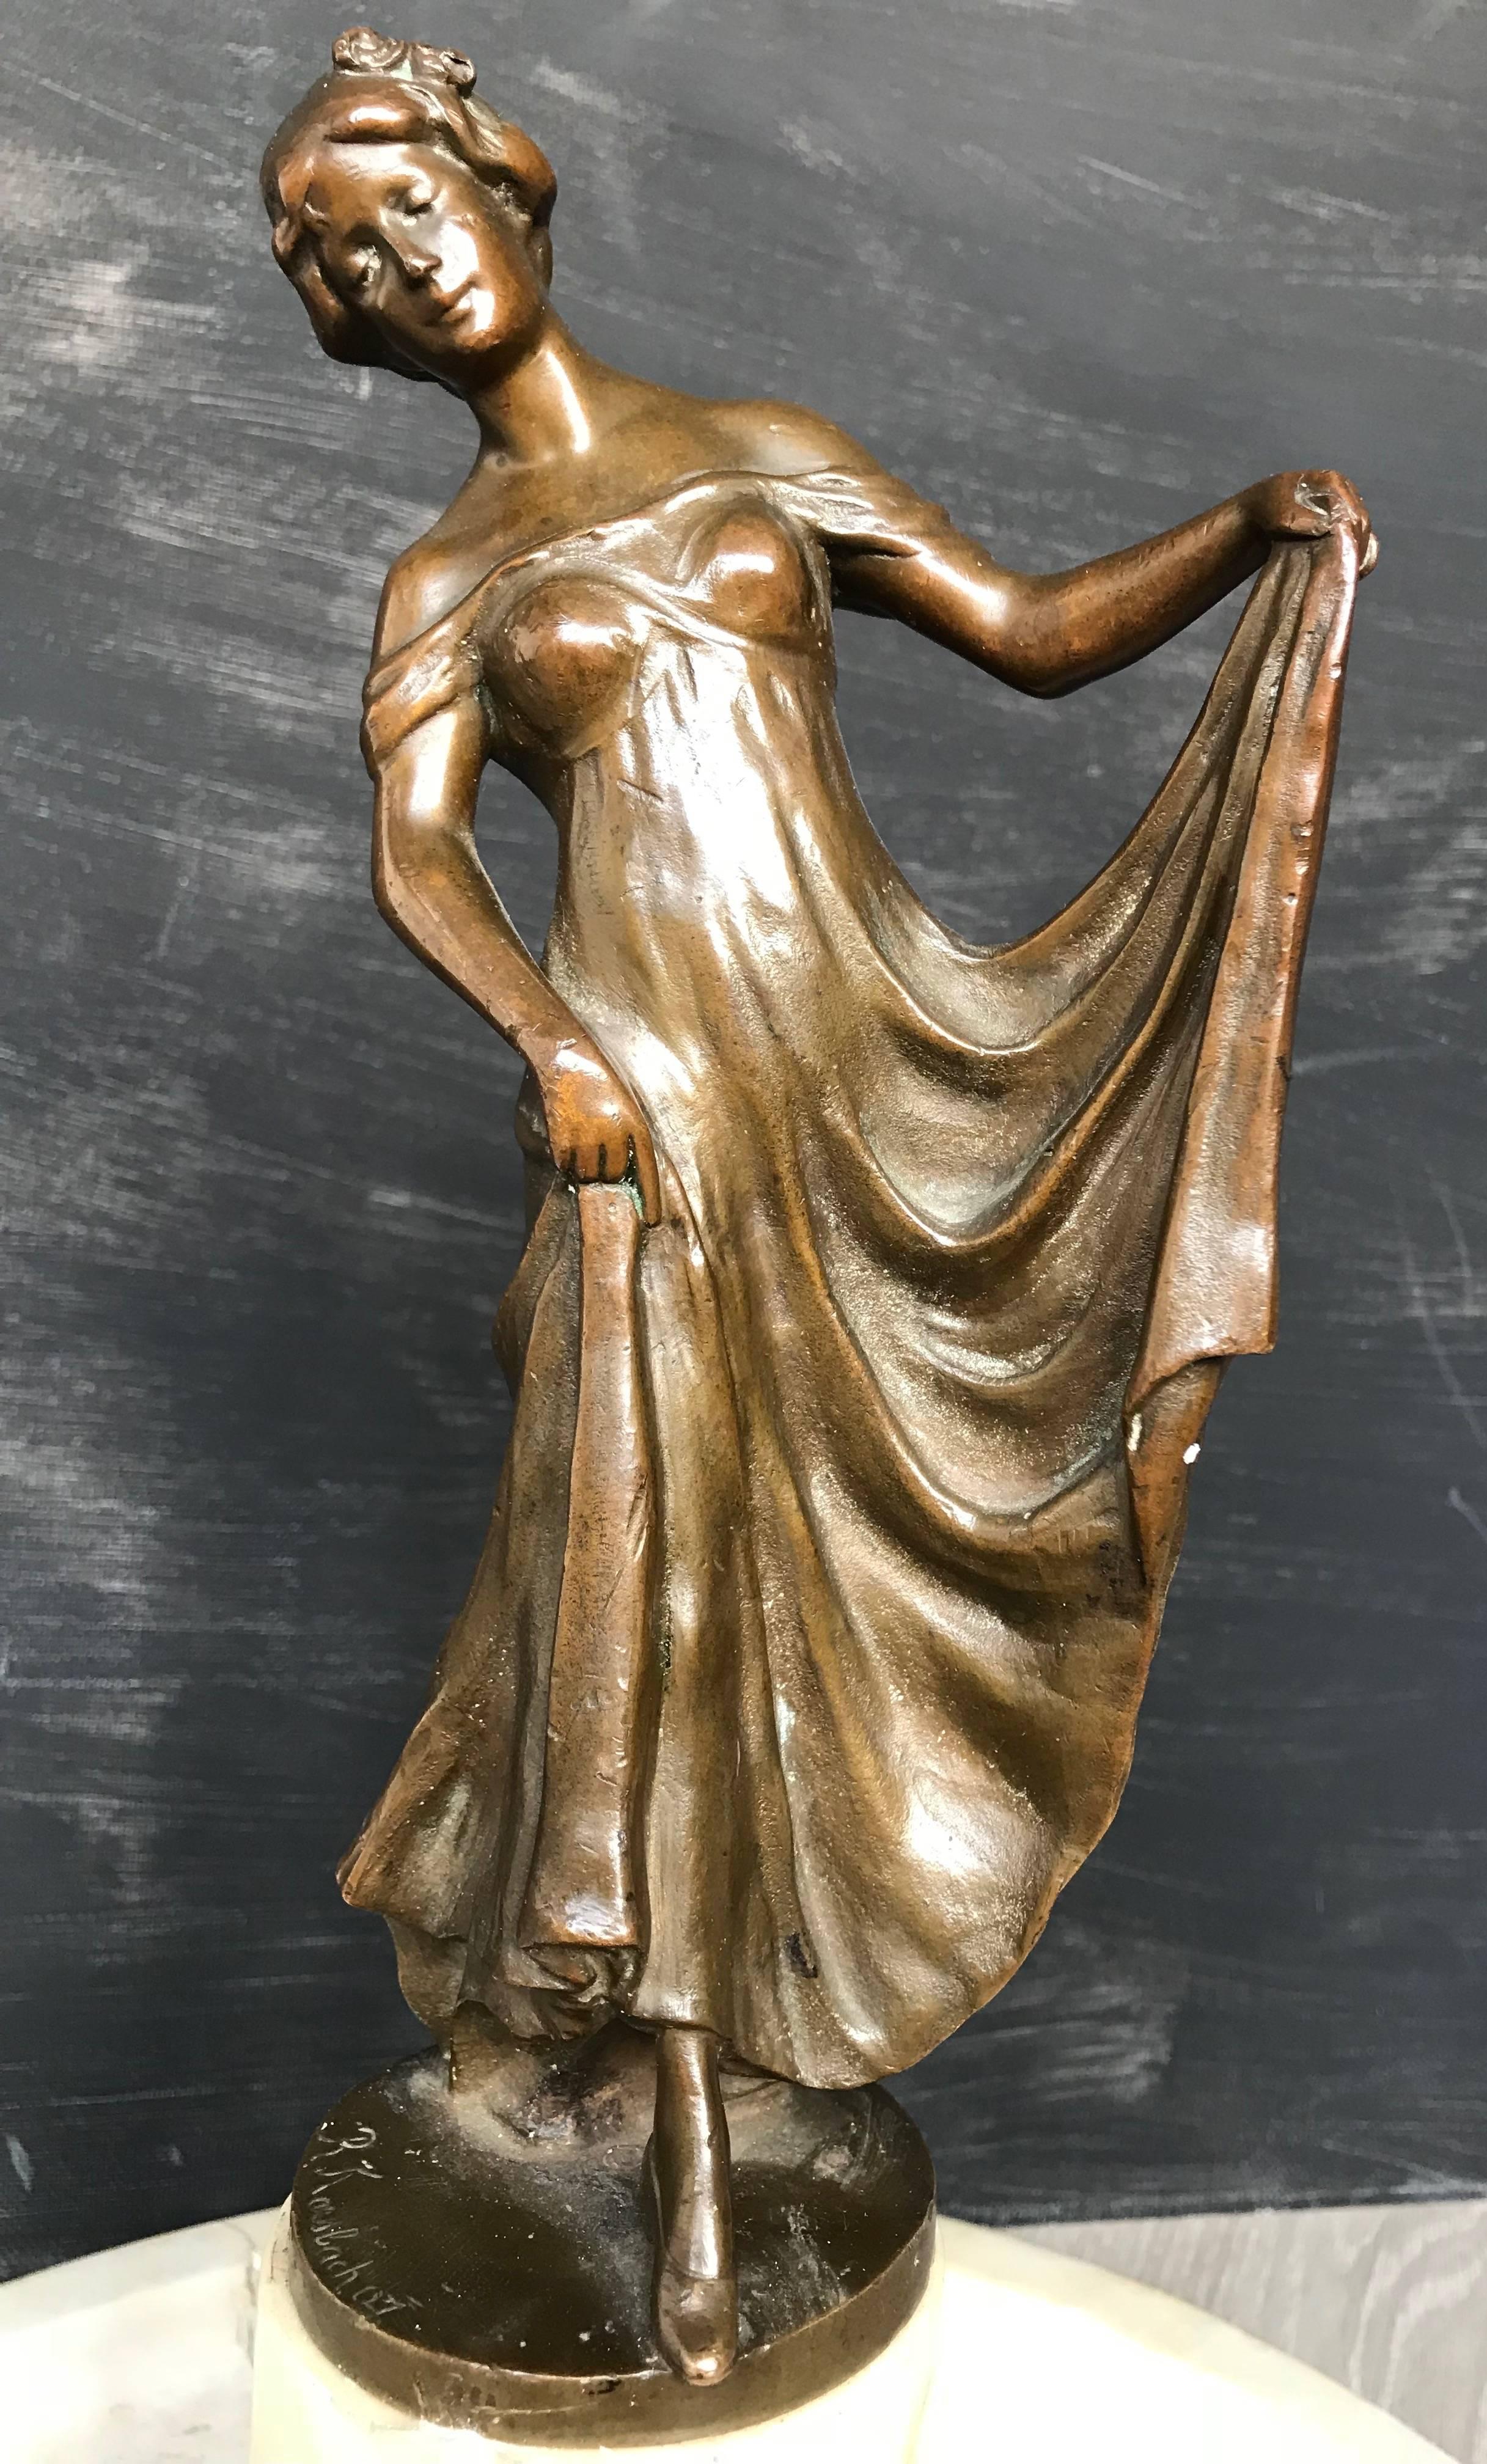 Marked and highly decorative antique Jugendstil sculpture. 

This fine work of Jugendstil art radiates pure elegance and innocence. The natural posture of this flowing lady sculpture and the way her dress perfectly drapes around her body reveals the